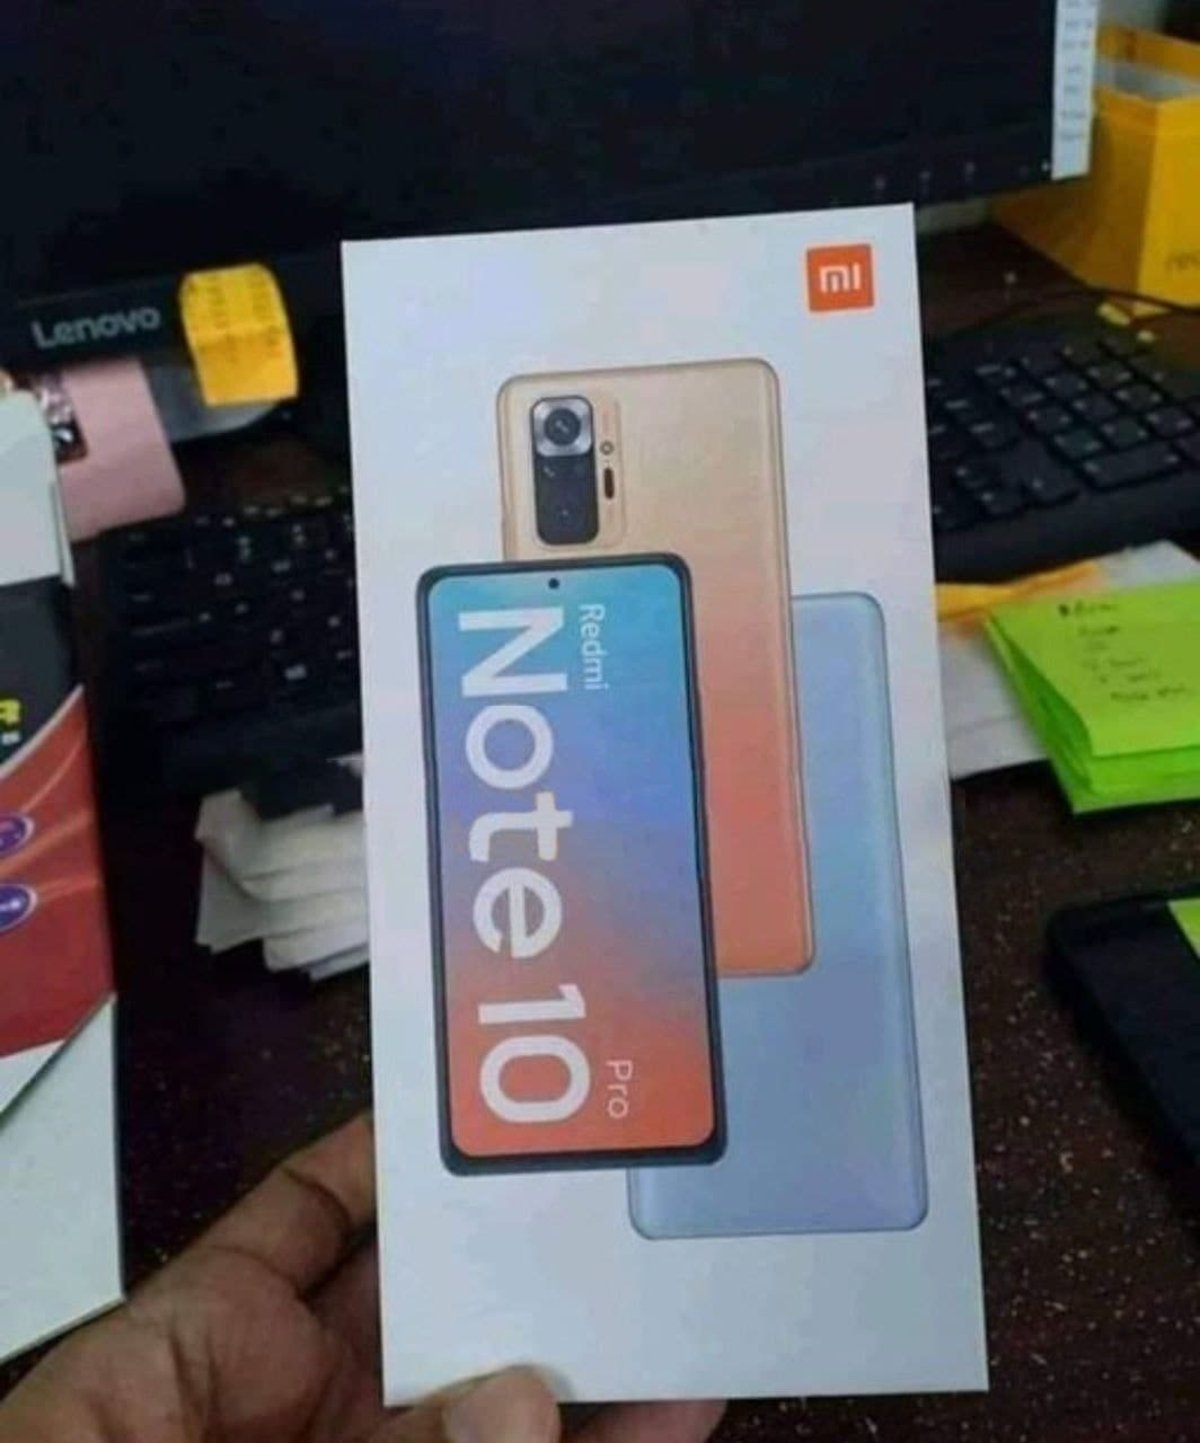 This is the box of the Redmi Note 10 Pro